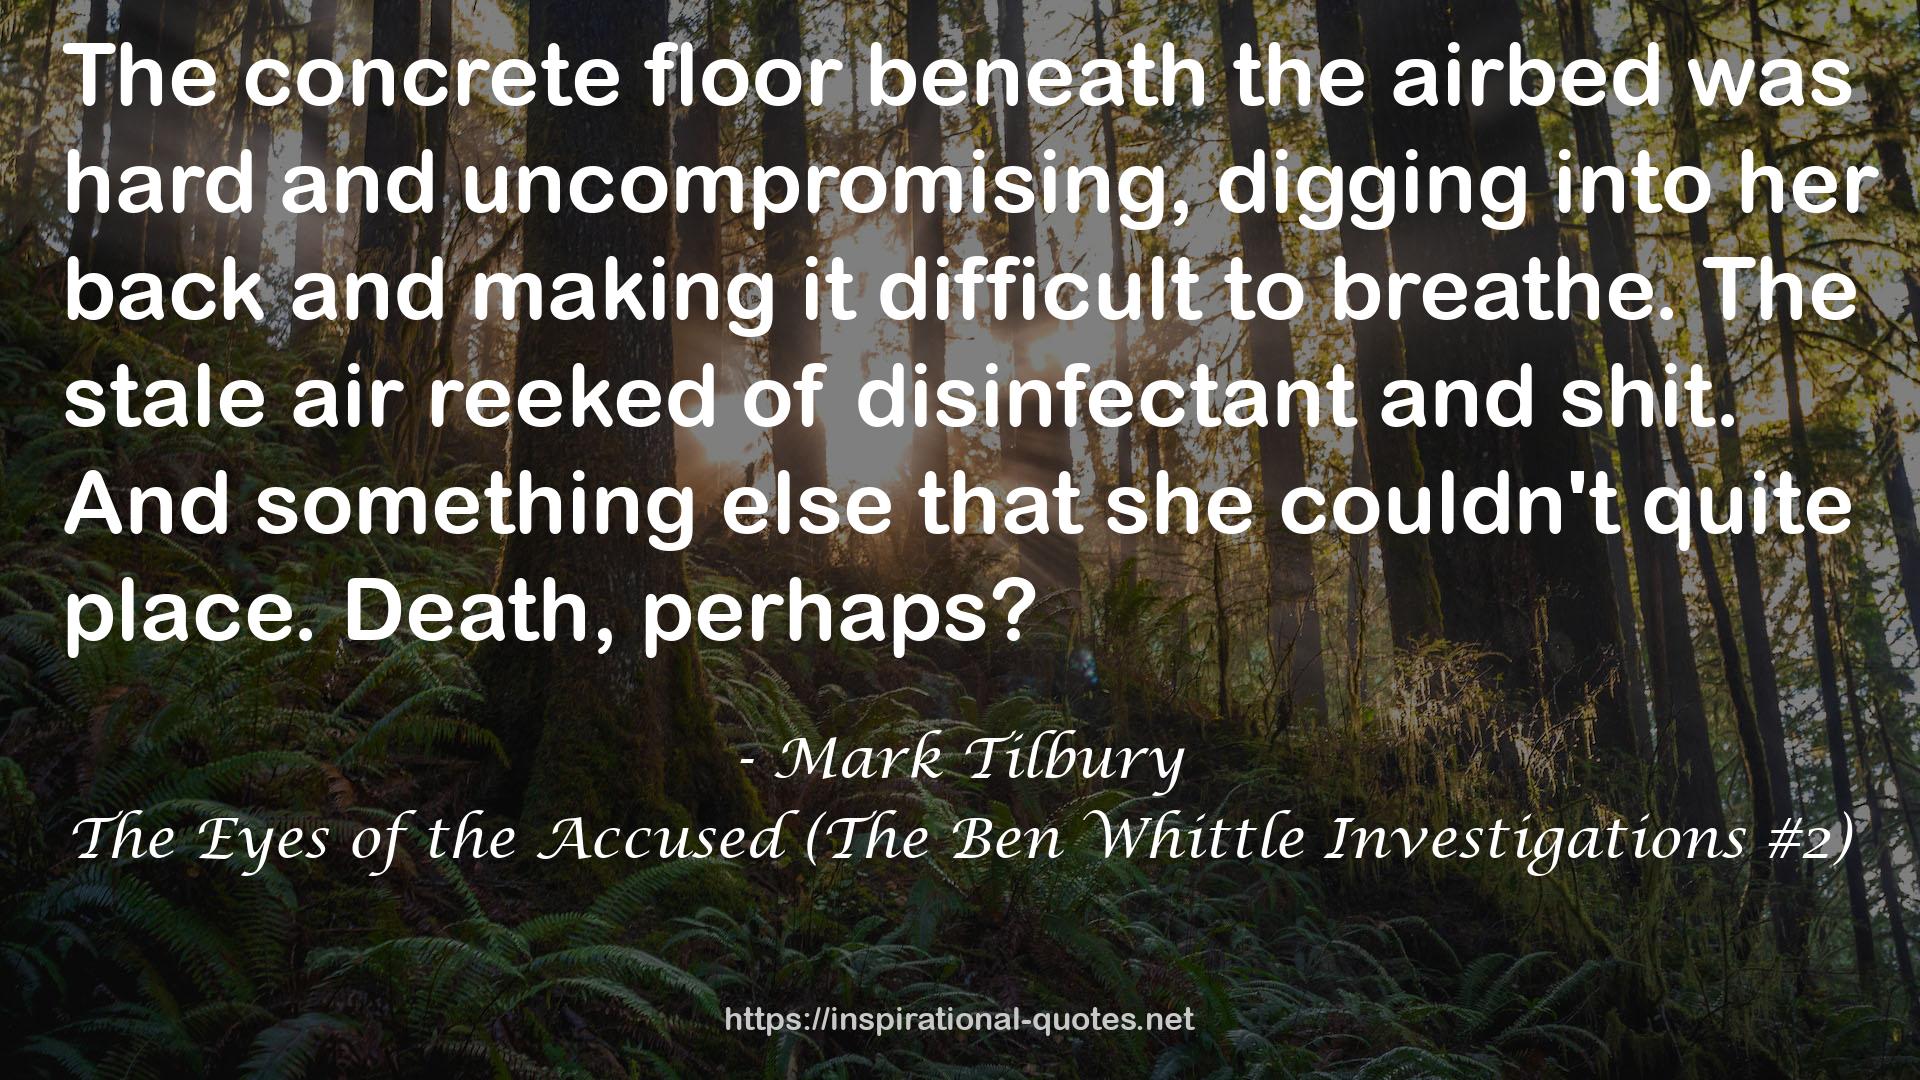 The Eyes of the Accused (The Ben Whittle Investigations #2) QUOTES